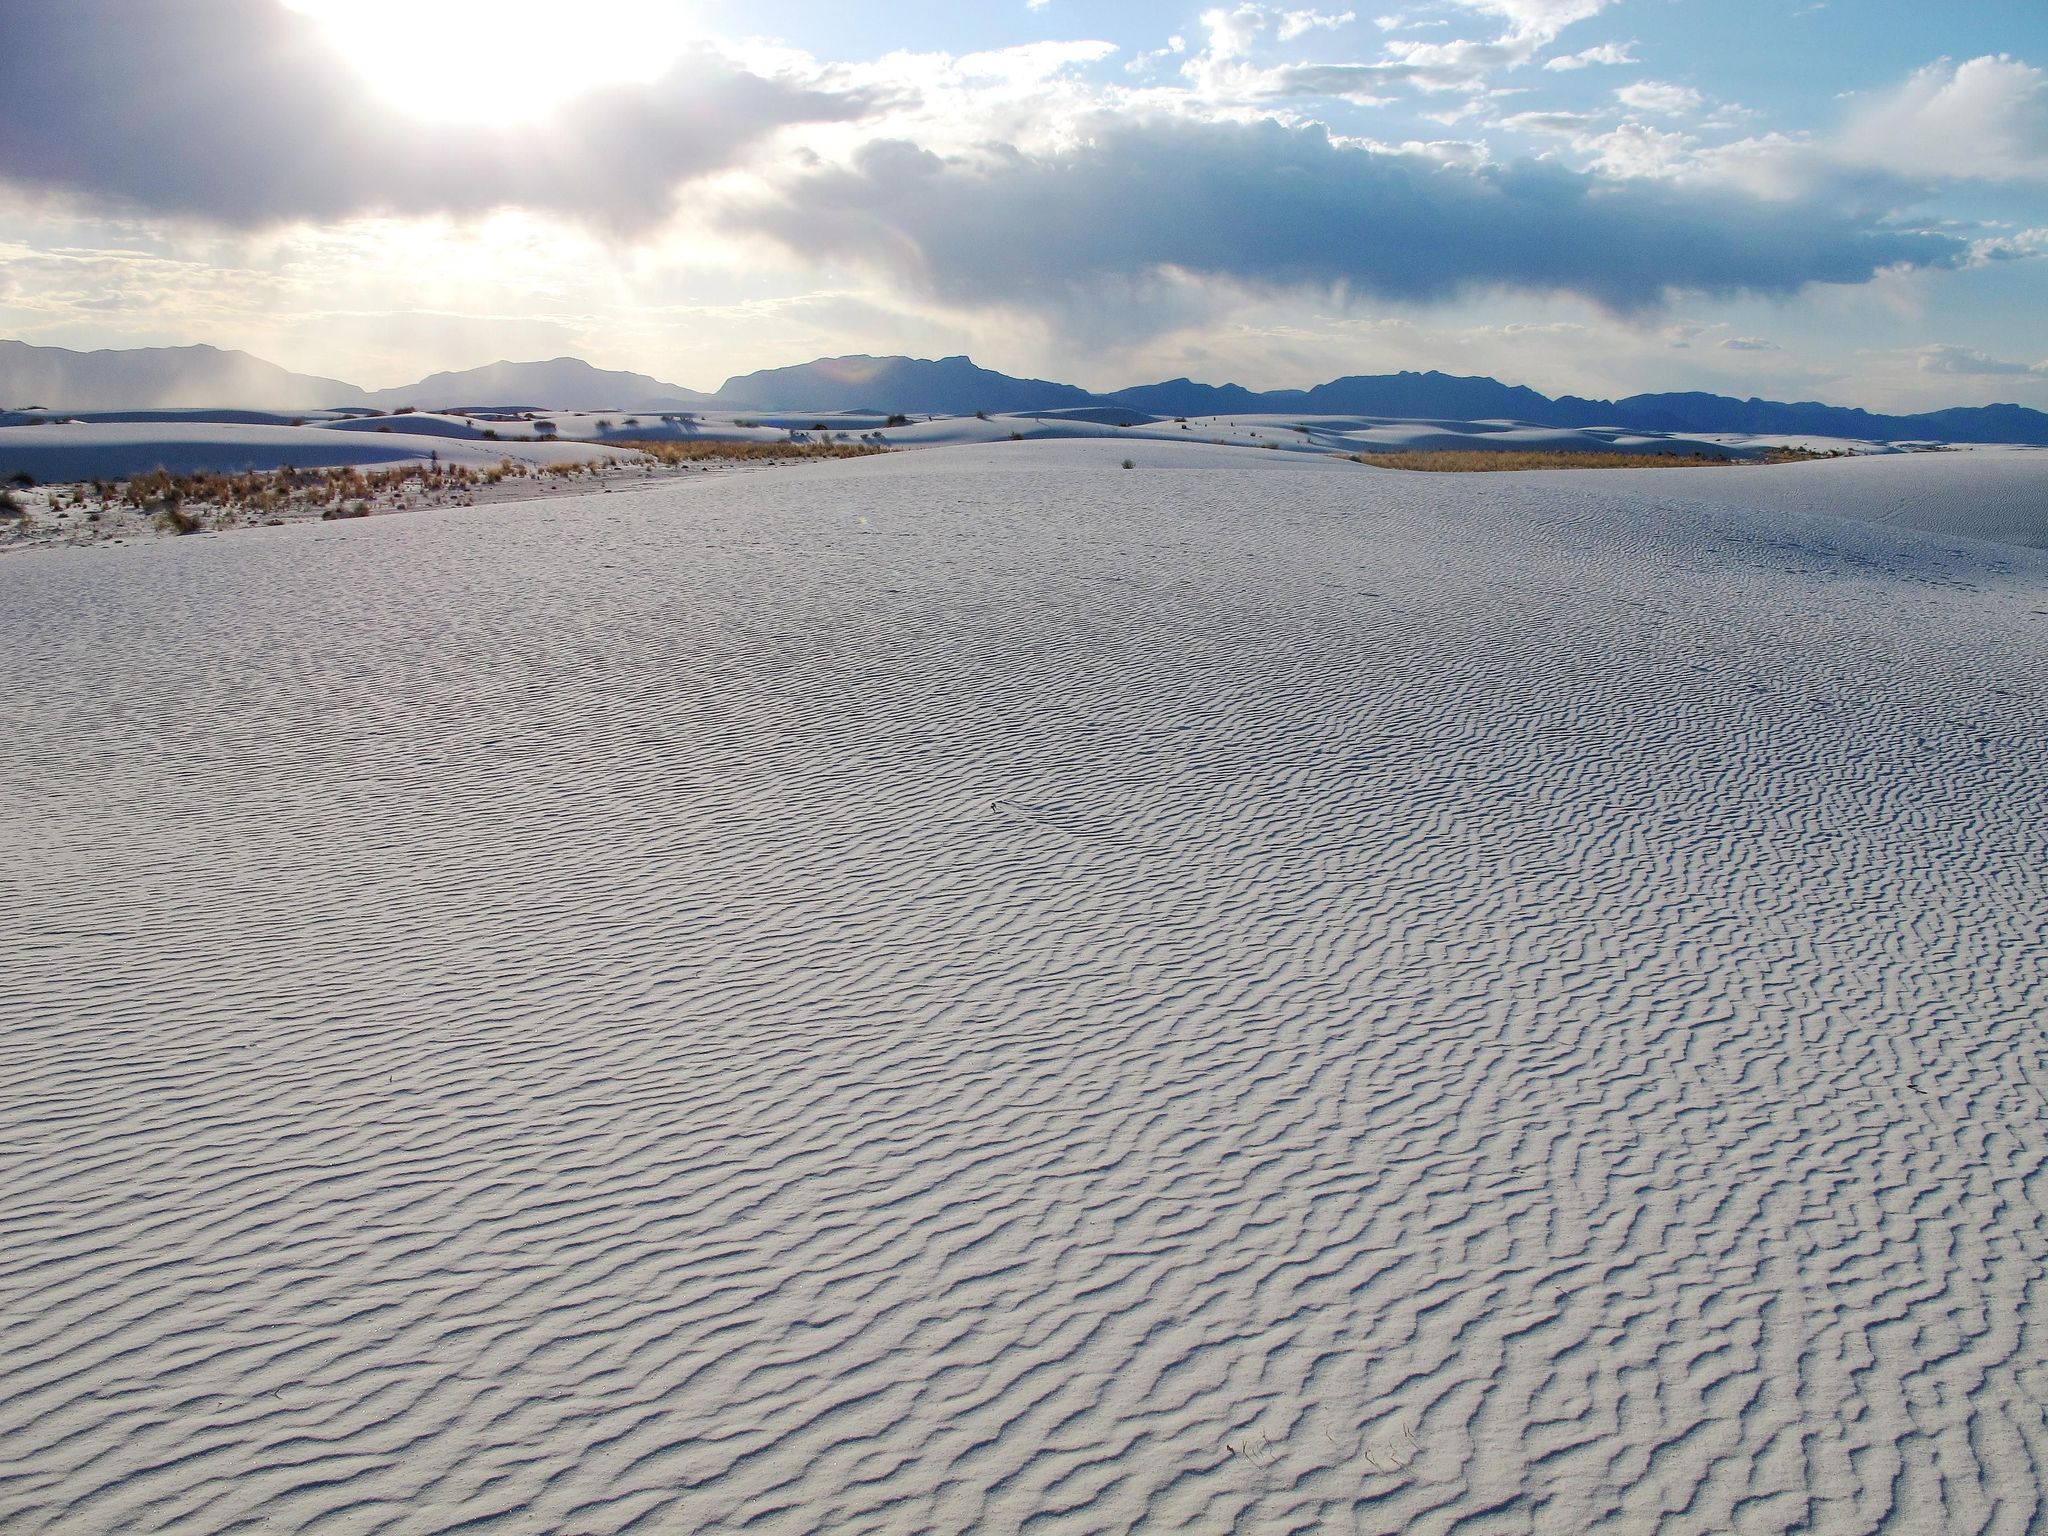 Sunsets are one of the most popular times to visit White Sands. Visitors can experience sunset every day of the year.